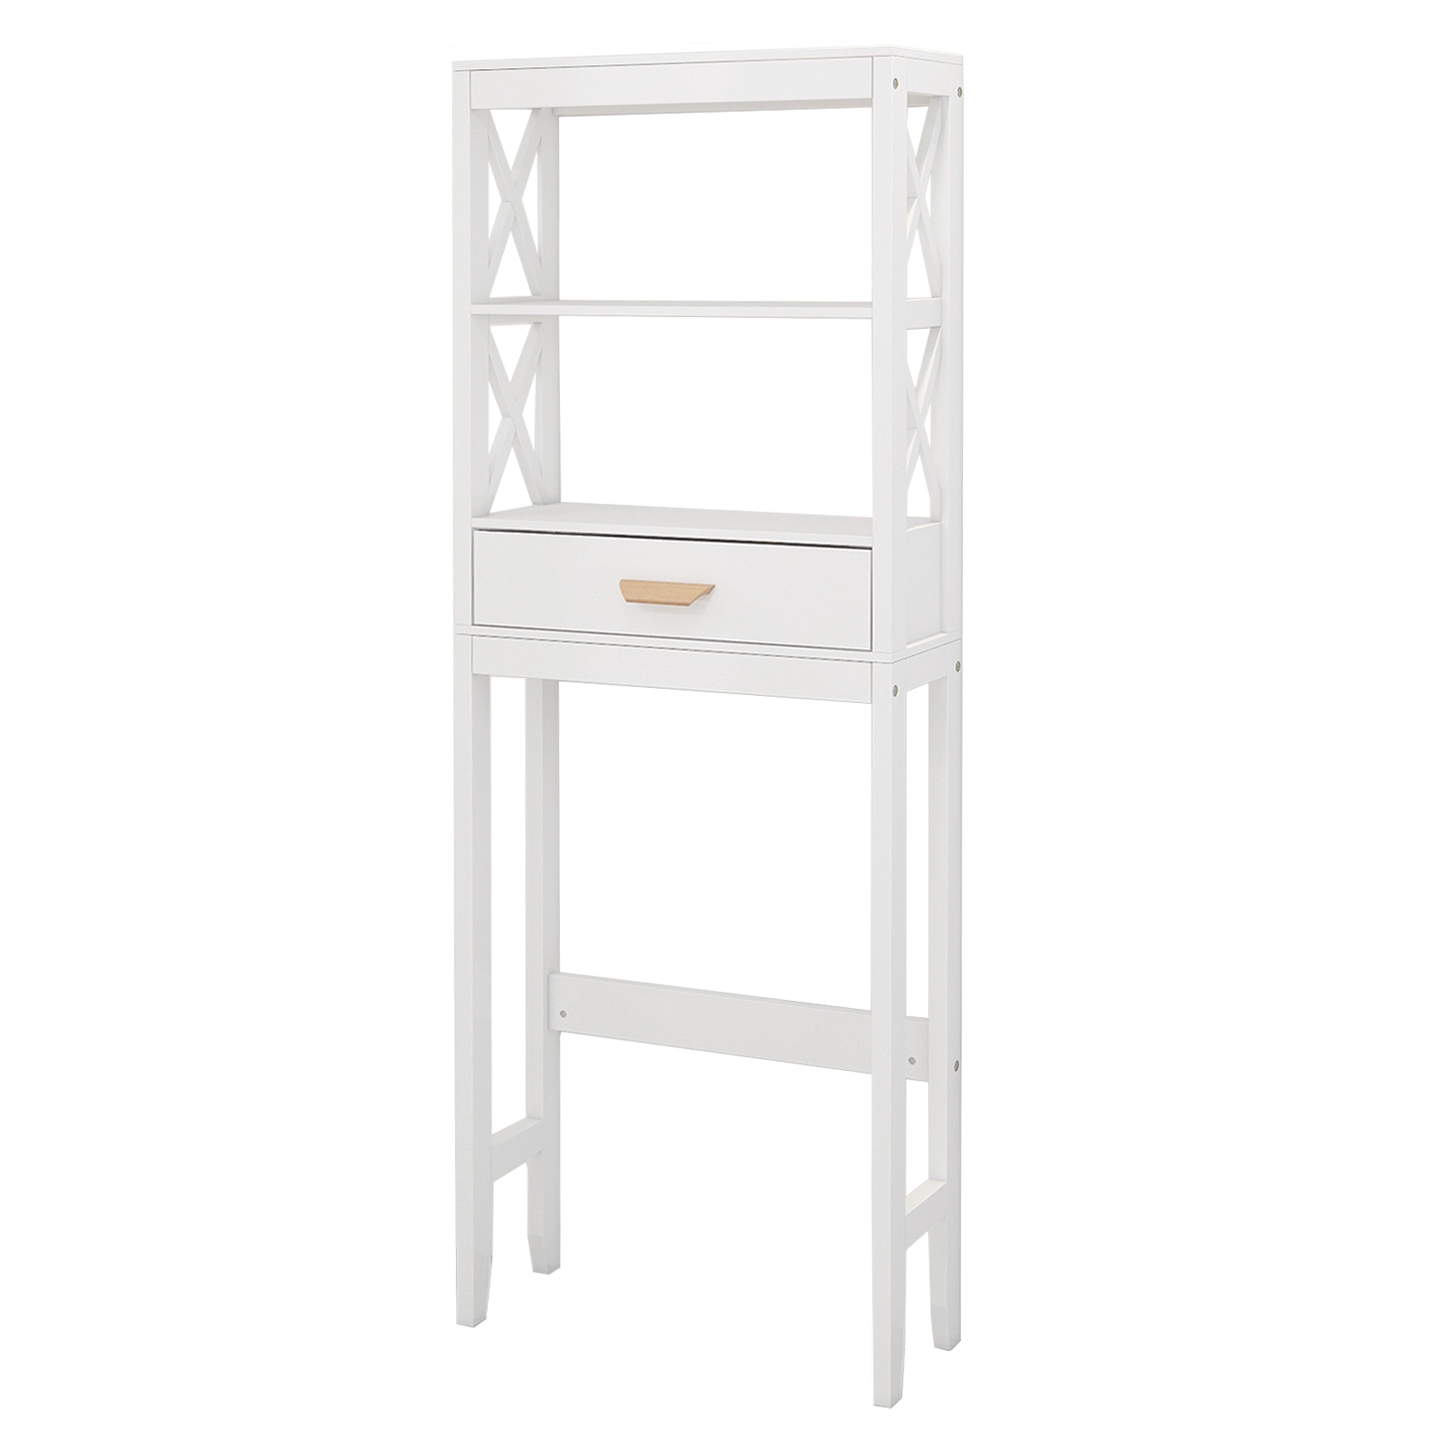 Over-the-Toilet Storage Cabinet White with one Drawer and 2 Shelves Space Saver Bathroom Rack-Boyel Living